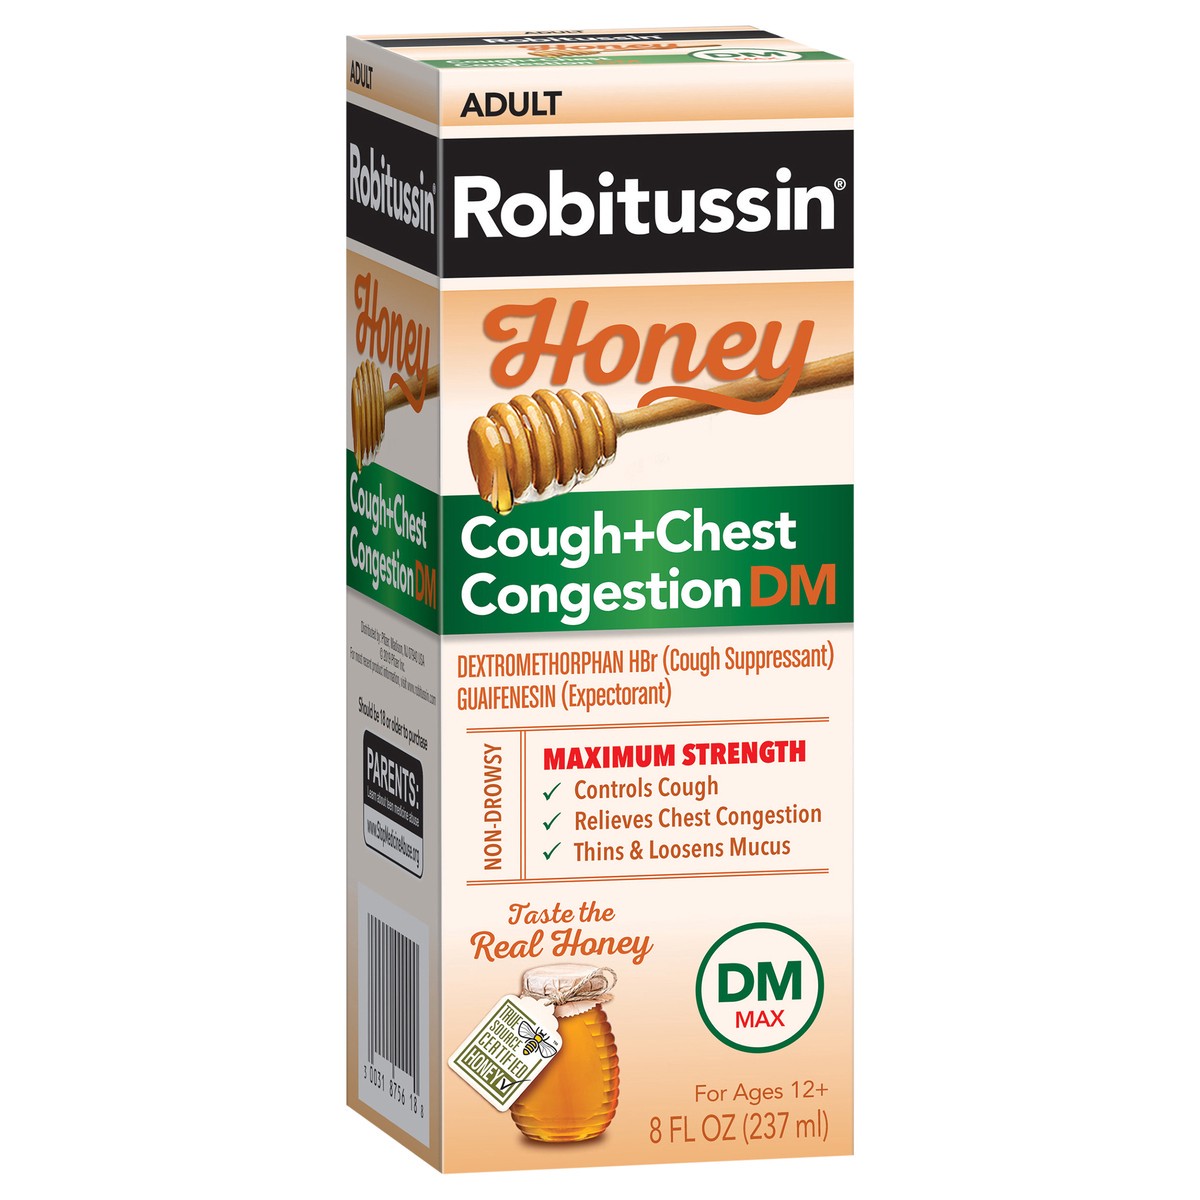 slide 2 of 9, Robitussin Maximum Strength Honey Cough + Chest Congestion DM, Cough Medicine for Cough and Chest Congestion Relief Made with Real Honey - 8 Fl Oz Bottle, 8 fl oz